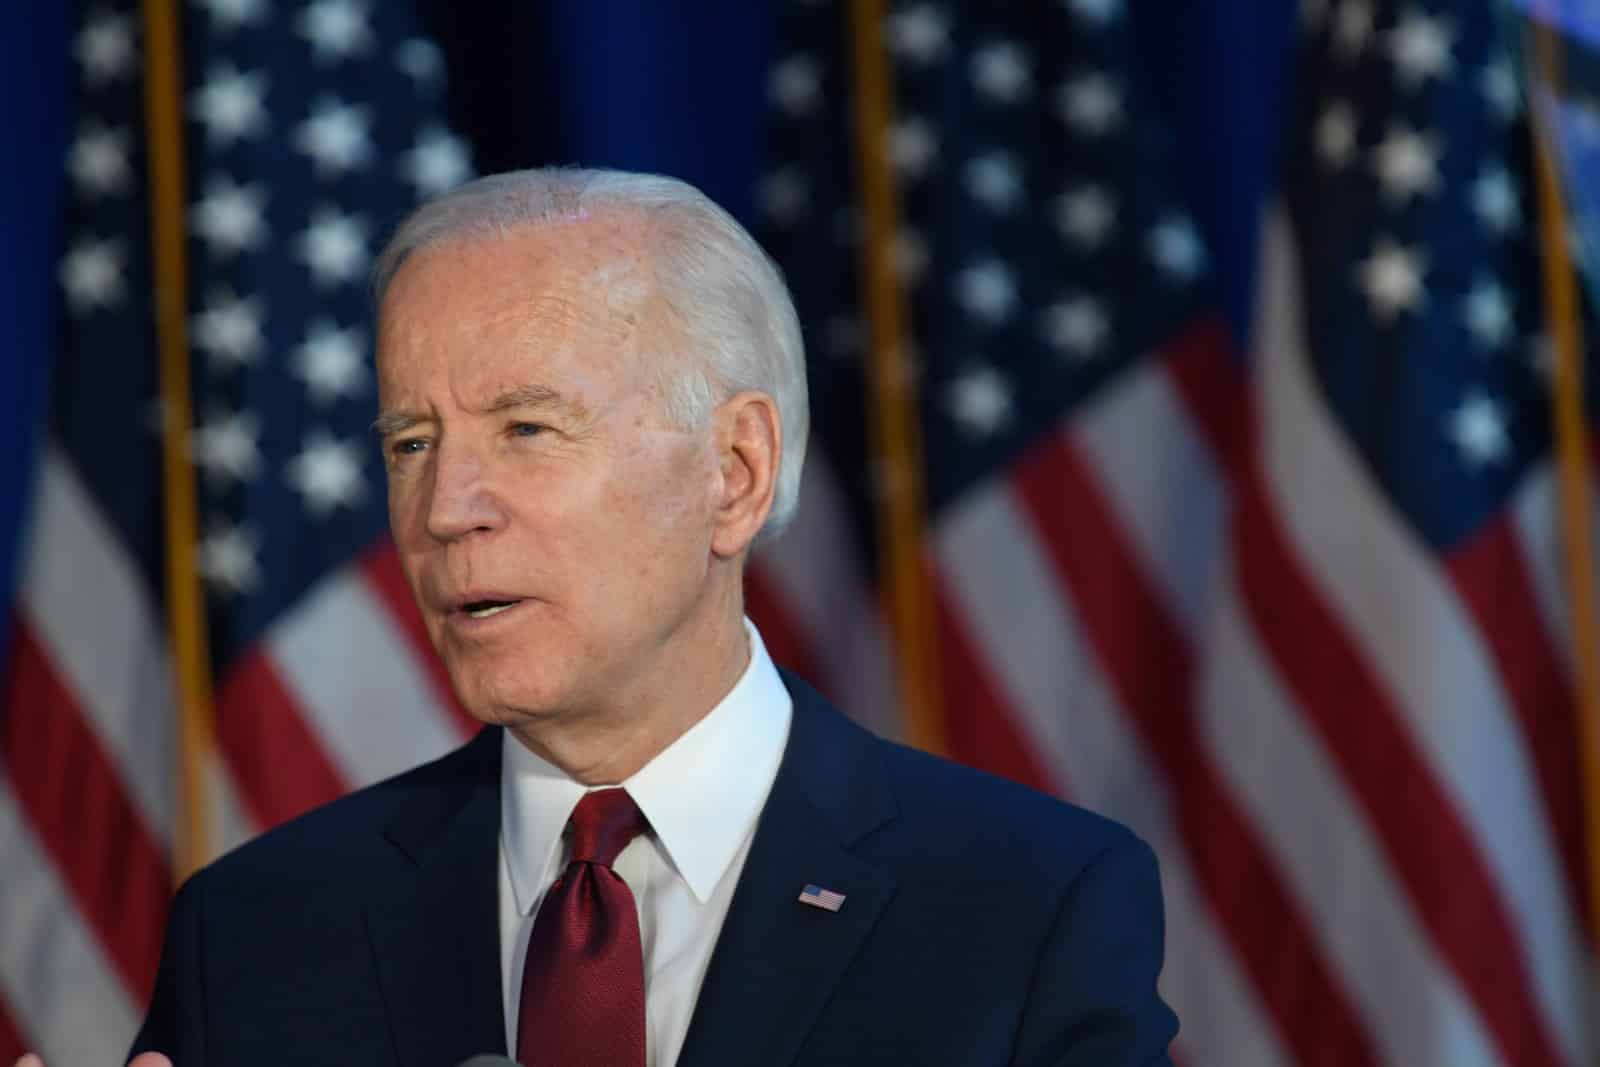 Image Credit: Shutterstock / Ron Adar <p><span>Despite President Joe Biden’s pro-women policies, some feminists have critiqued the administration for not going far enough in addressing issues like gender wage gaps and reproductive rights, reflecting ongoing tensions in political feminism.</span></p>